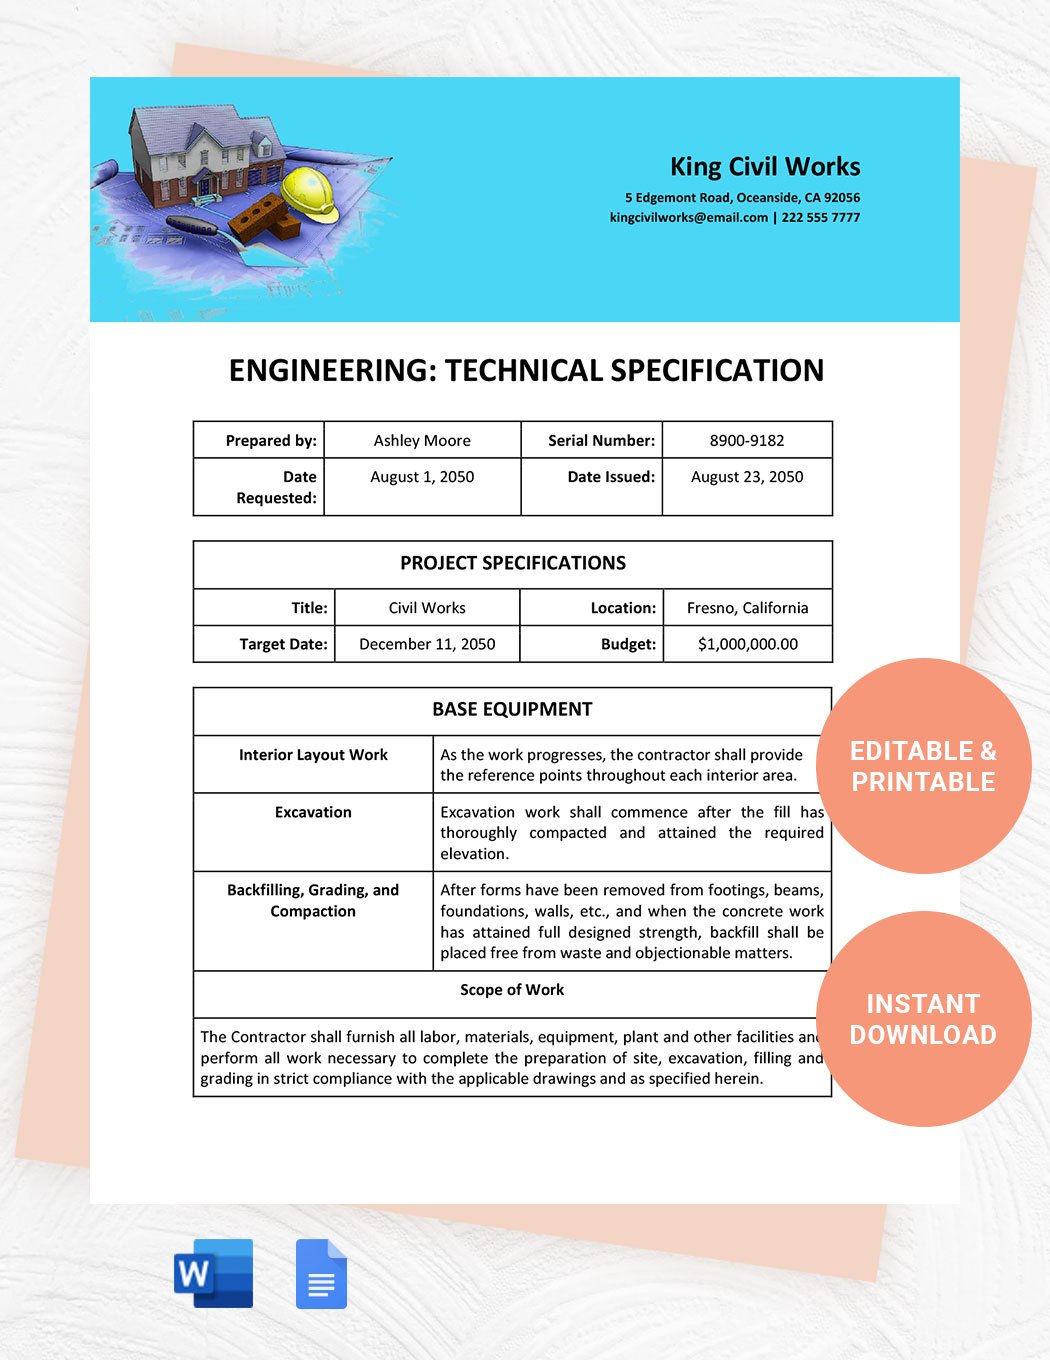 Engineering Technical Specification Template in Word, Google Docs